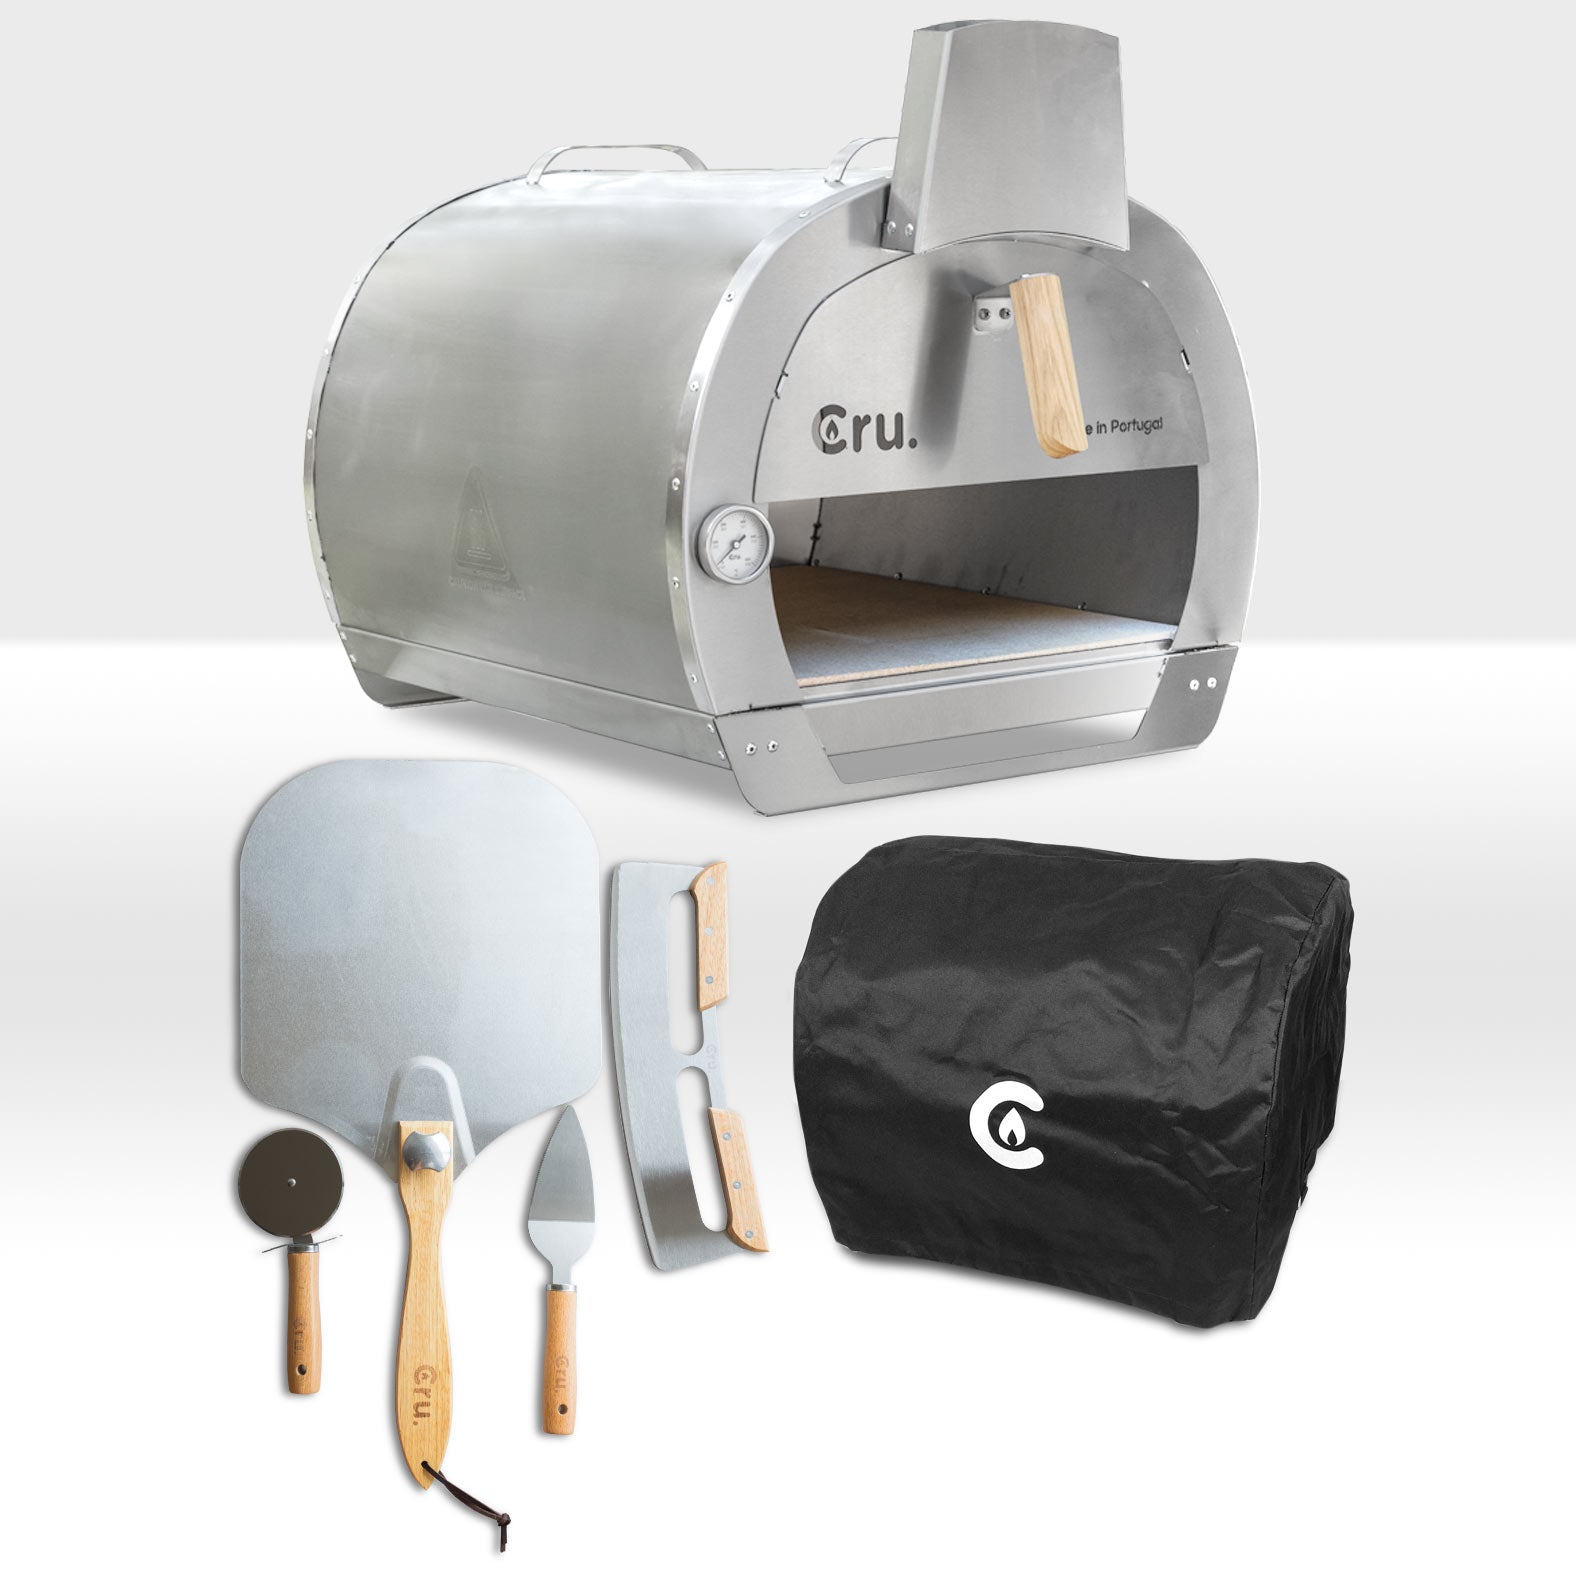 Cru Oven Model 32G2 Bundle with Portable Accessory Kit